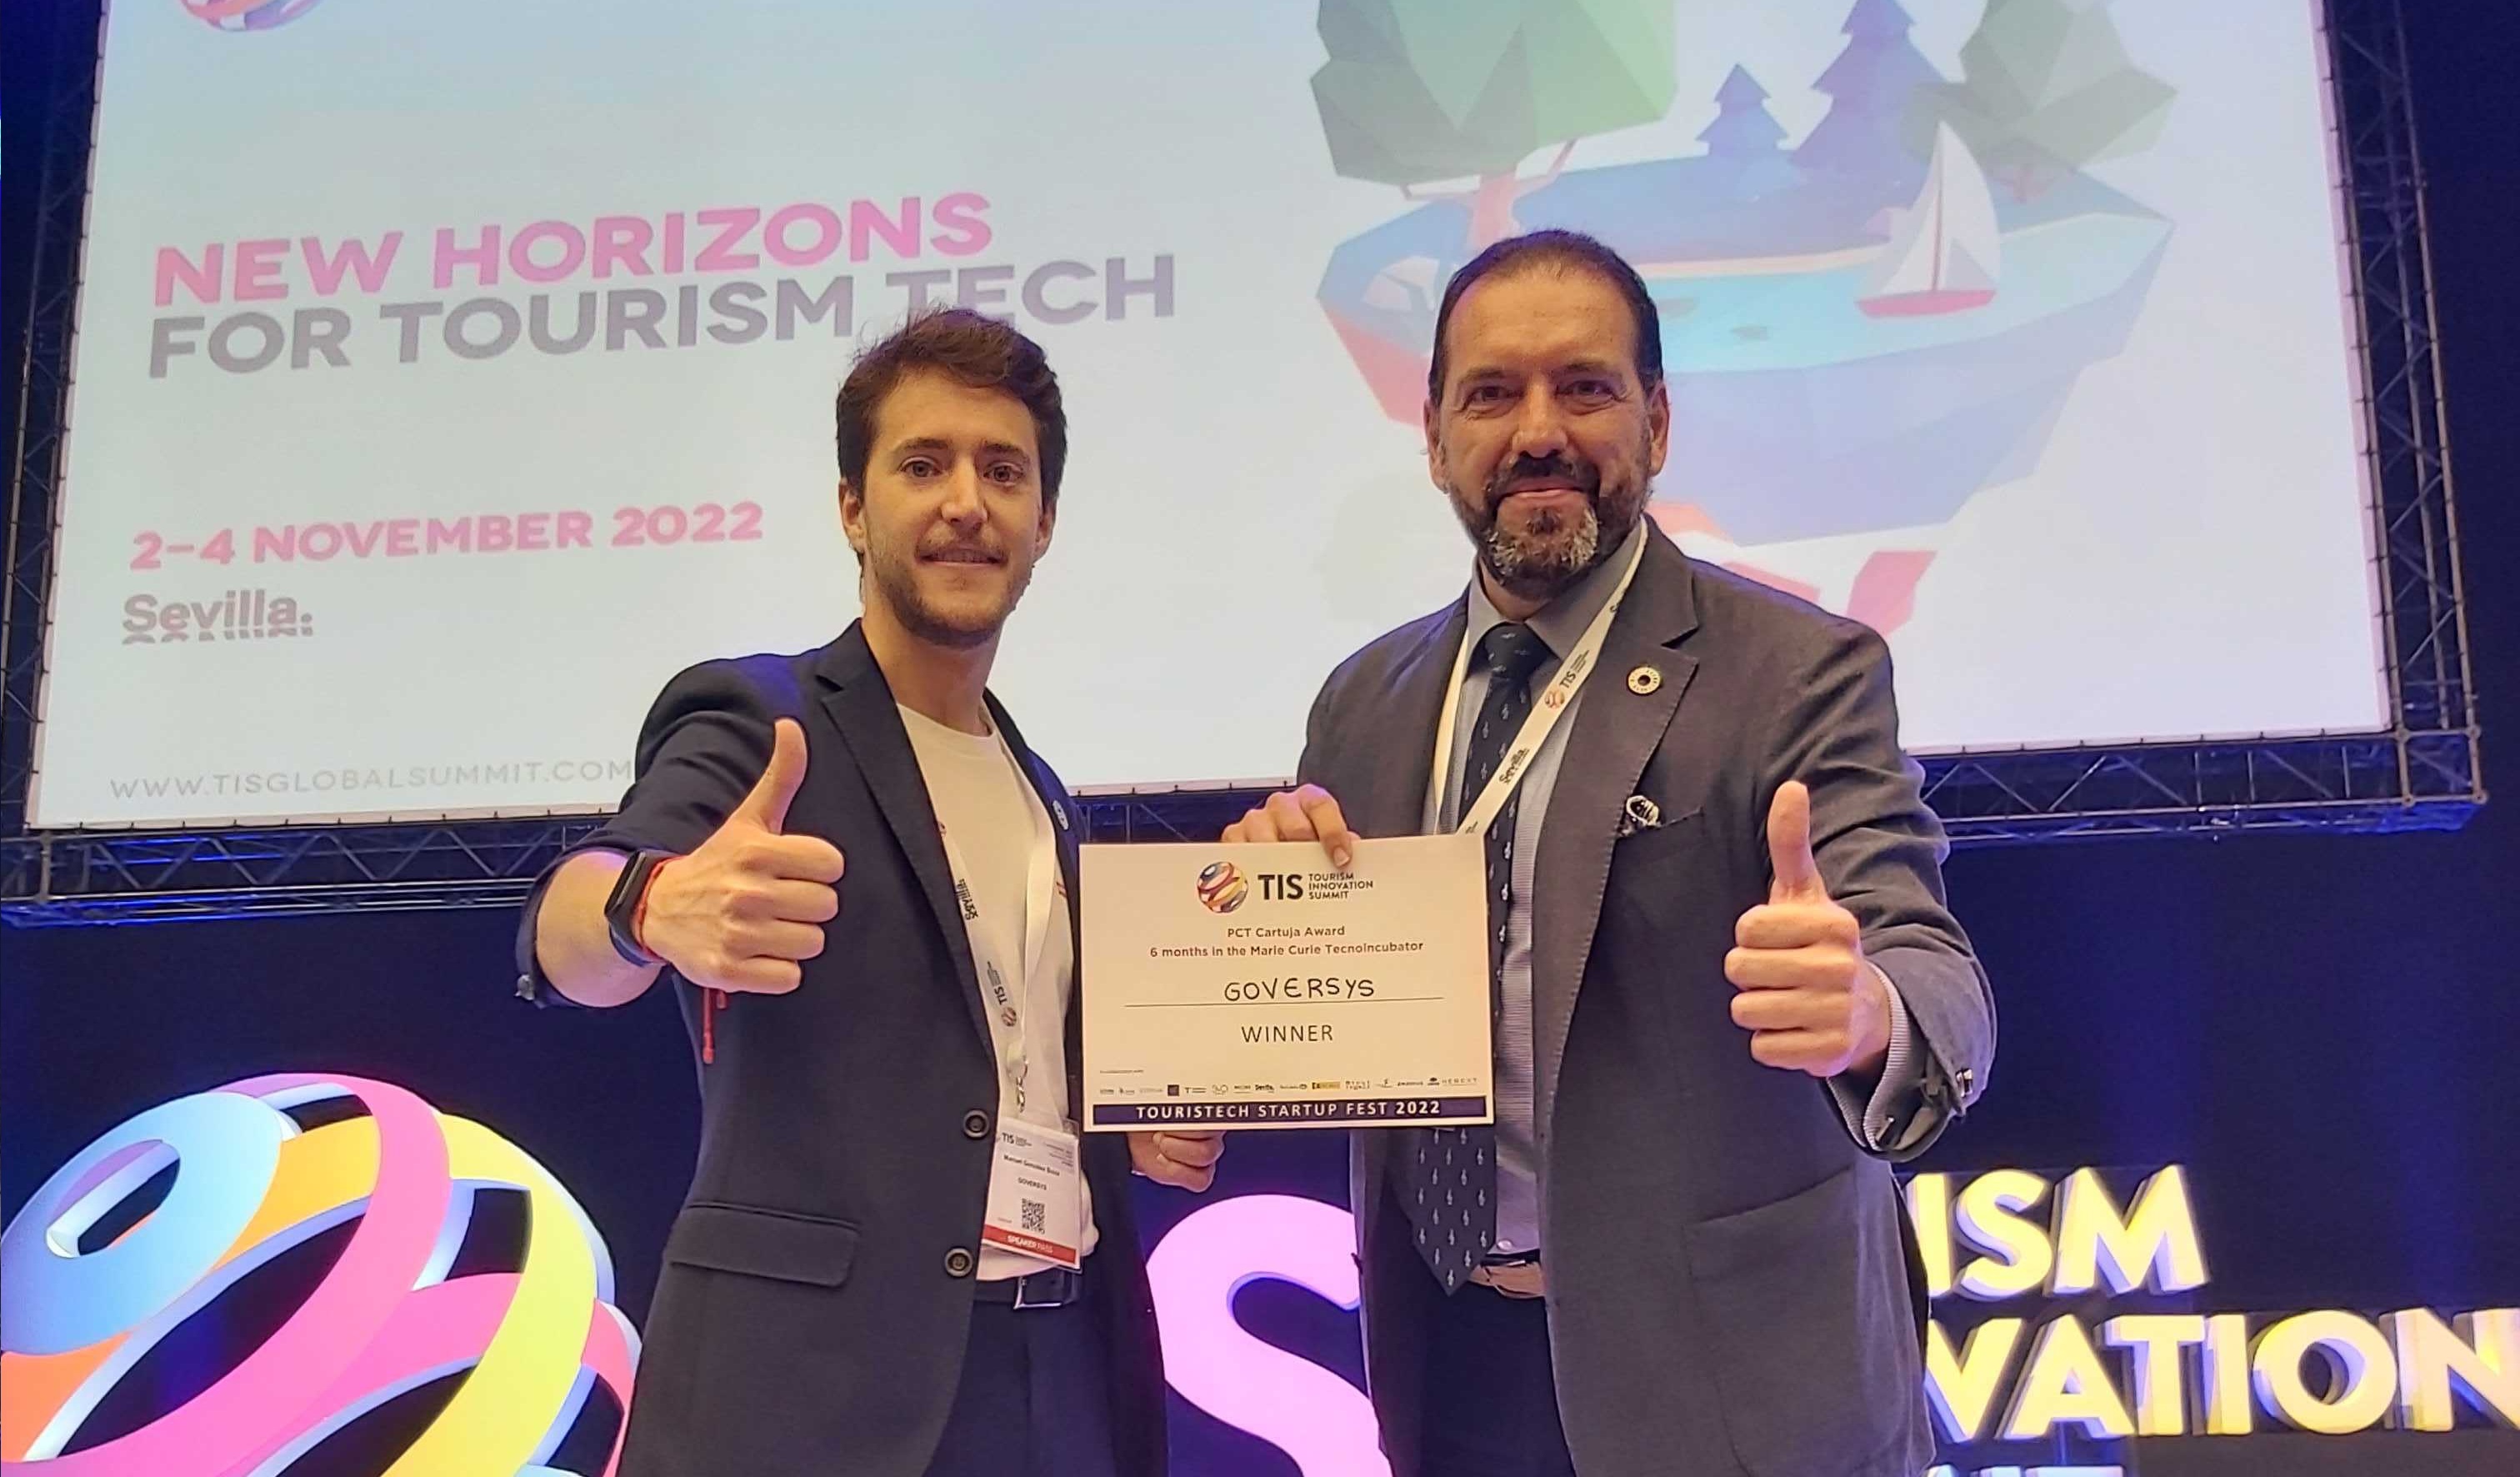 GOVERSYS wins the Touristech Startup Fest at the Tourism Innovation Summit (TIS) '22